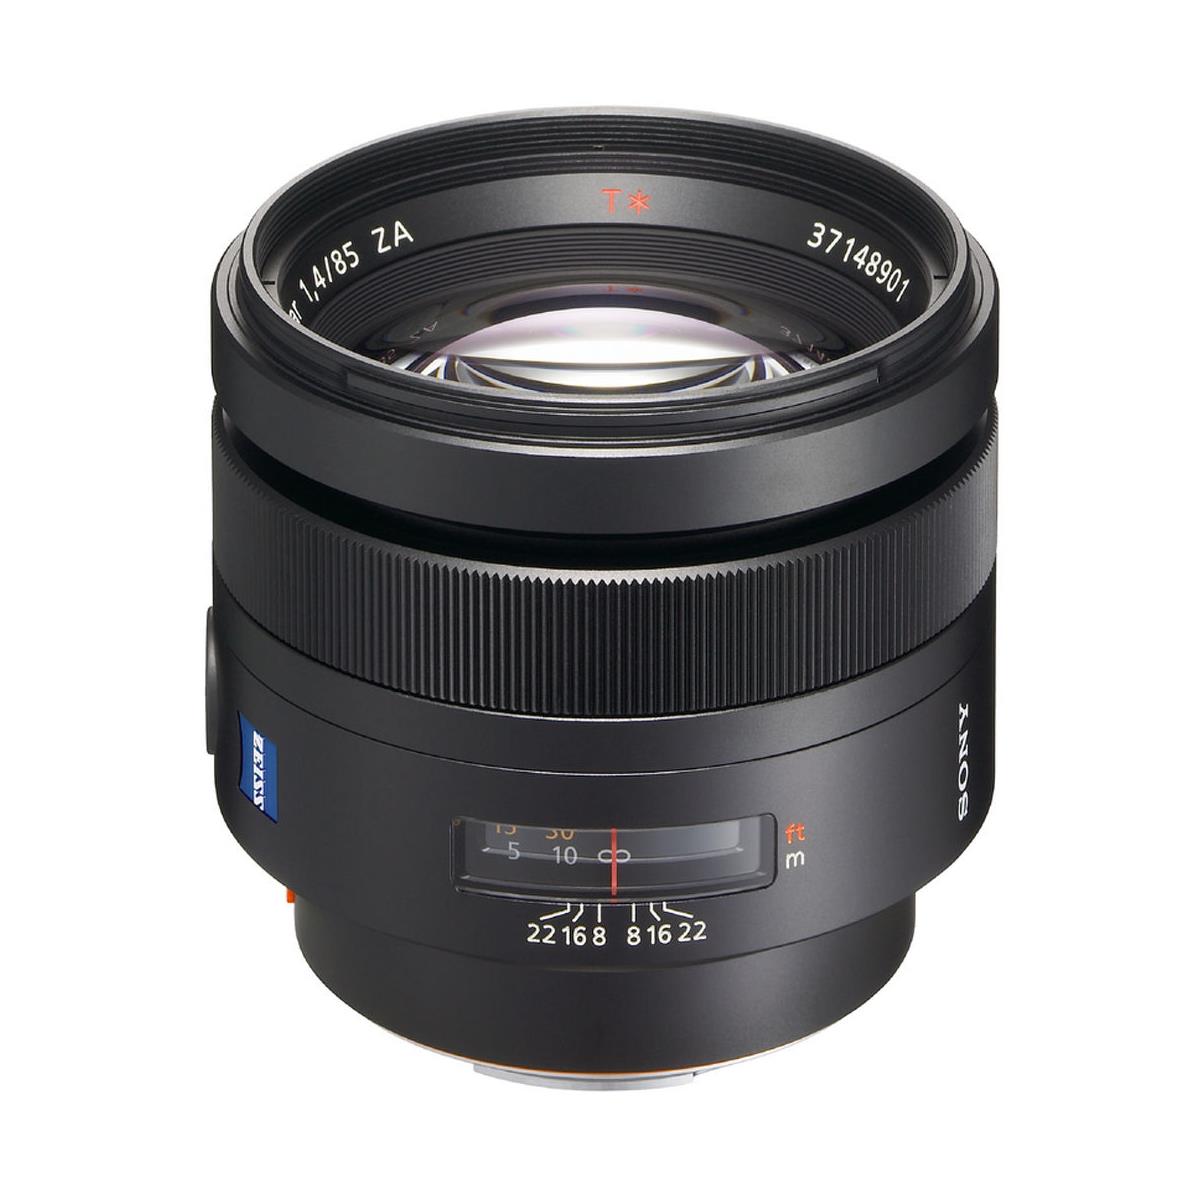 Image of Sony 85mm f/1.4 Planar T* Carl Zeiss A-Mount Lens